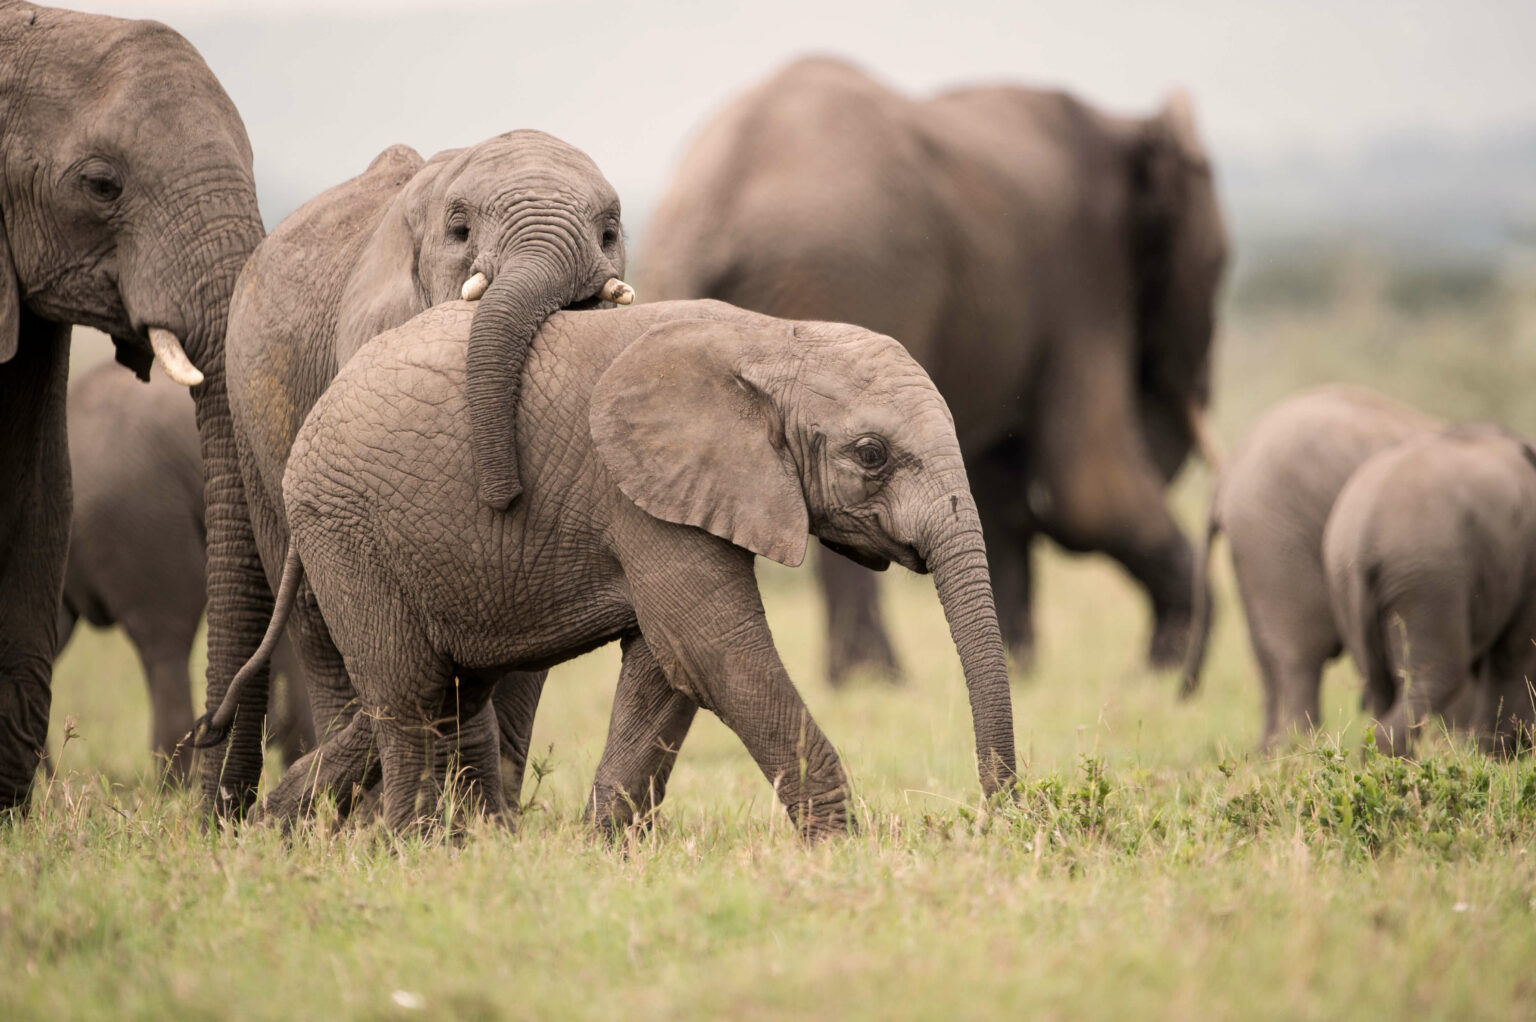 Two young elephants playing together in a herd in the Serengeti in Tanzania